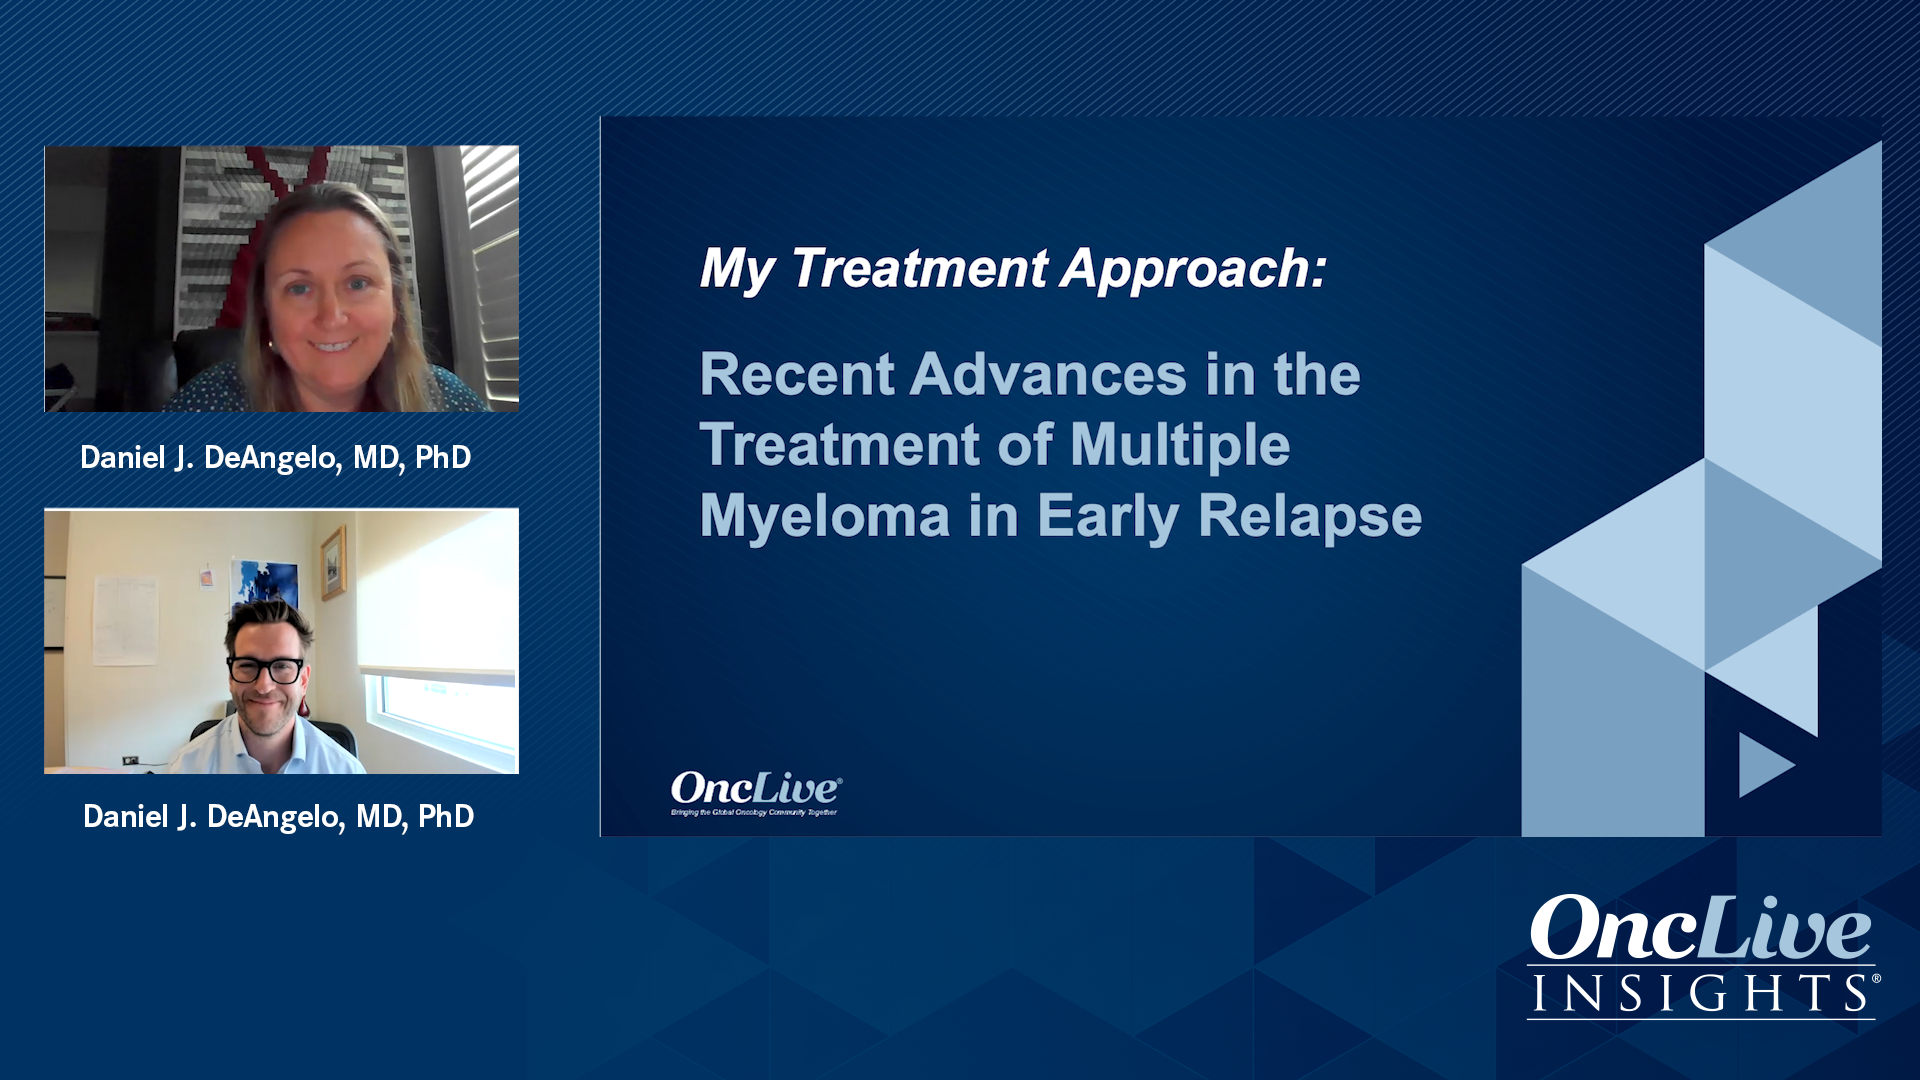 My Treatment Approach: Recent Advances in the Treatment of Multiple Myeloma in Early Relapse